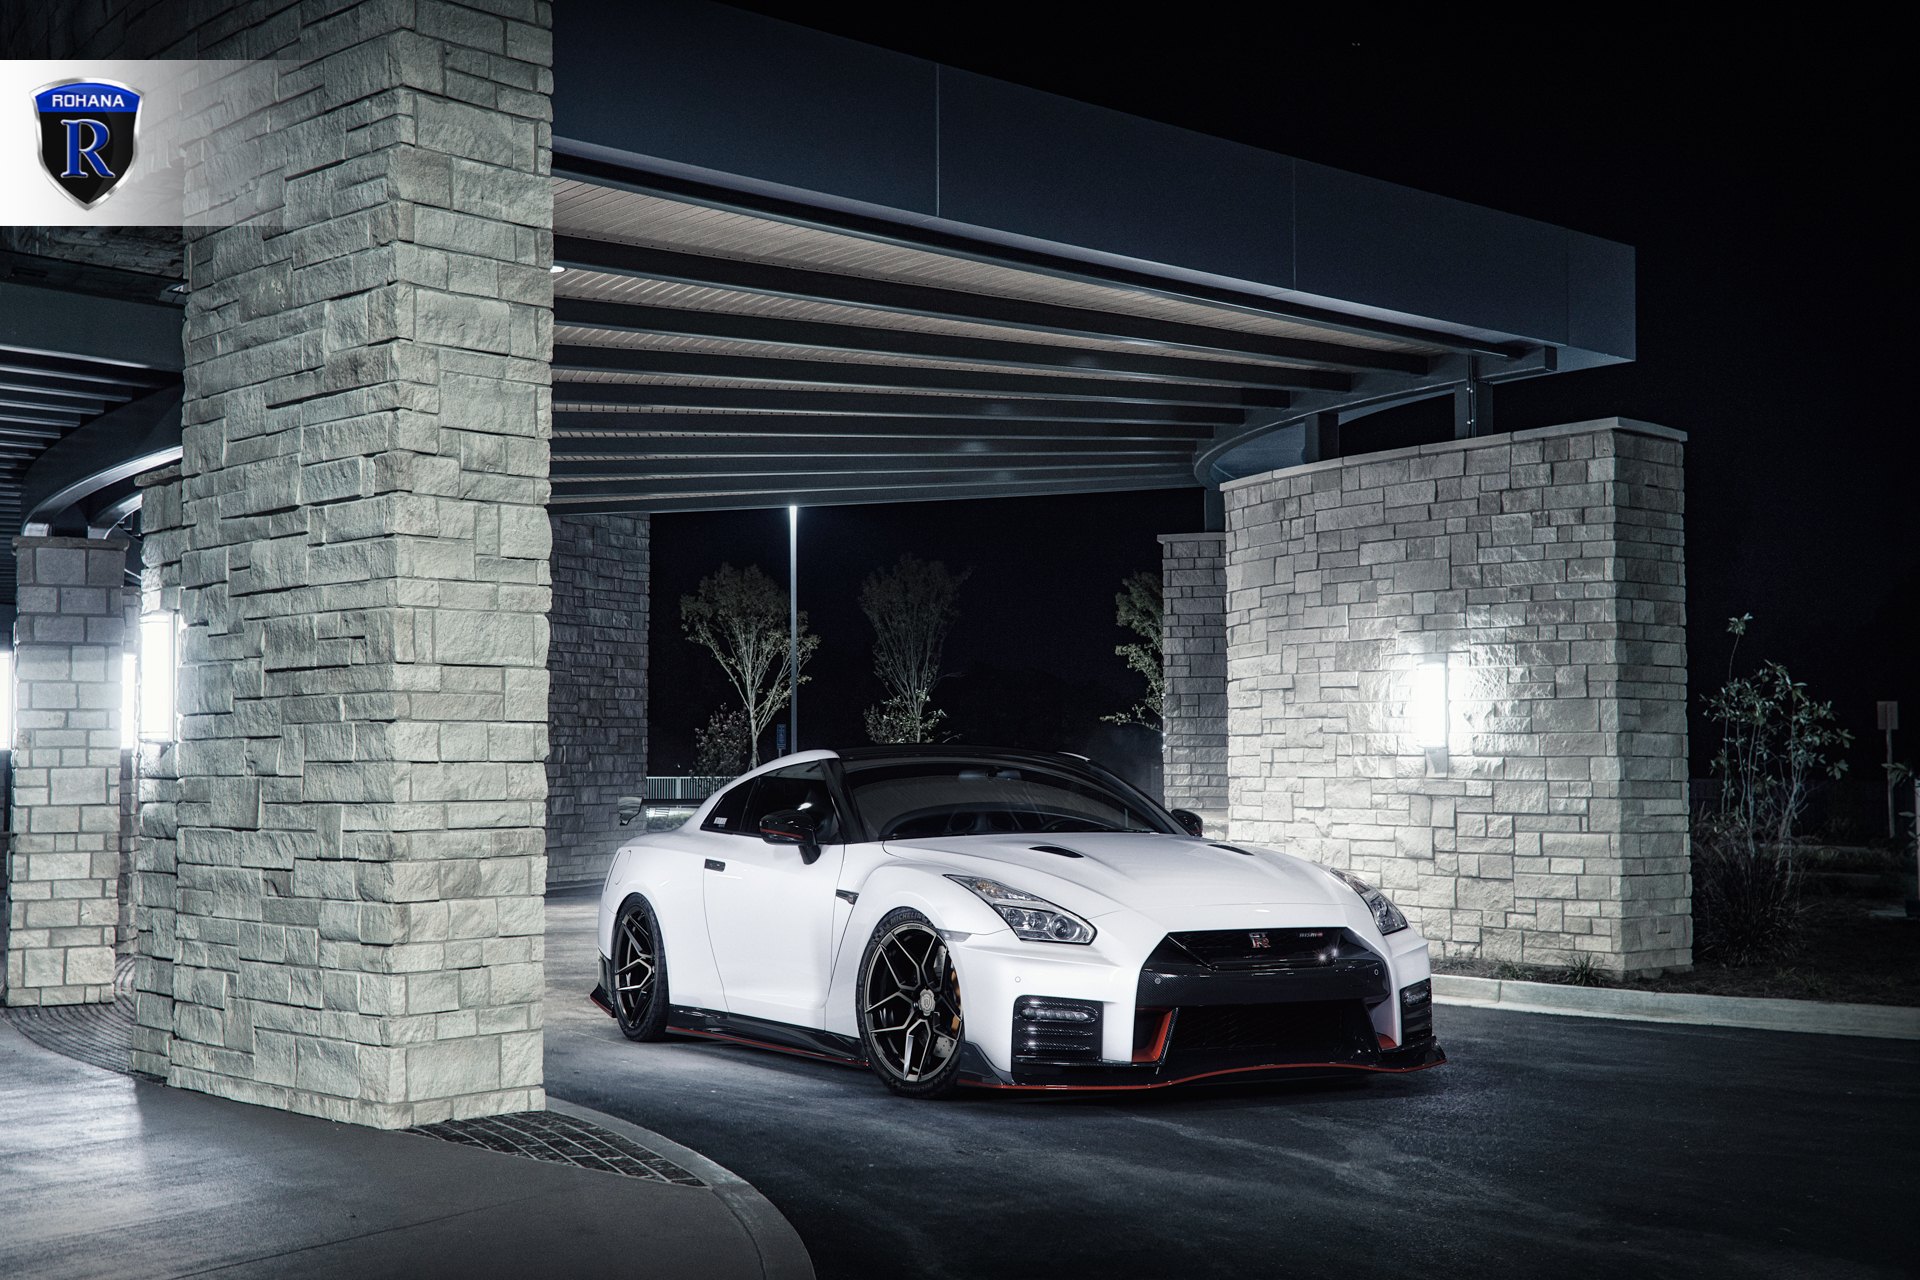 White Nissan GT-R with Crystal Clear Headlights - Photo by Rohana Wheels